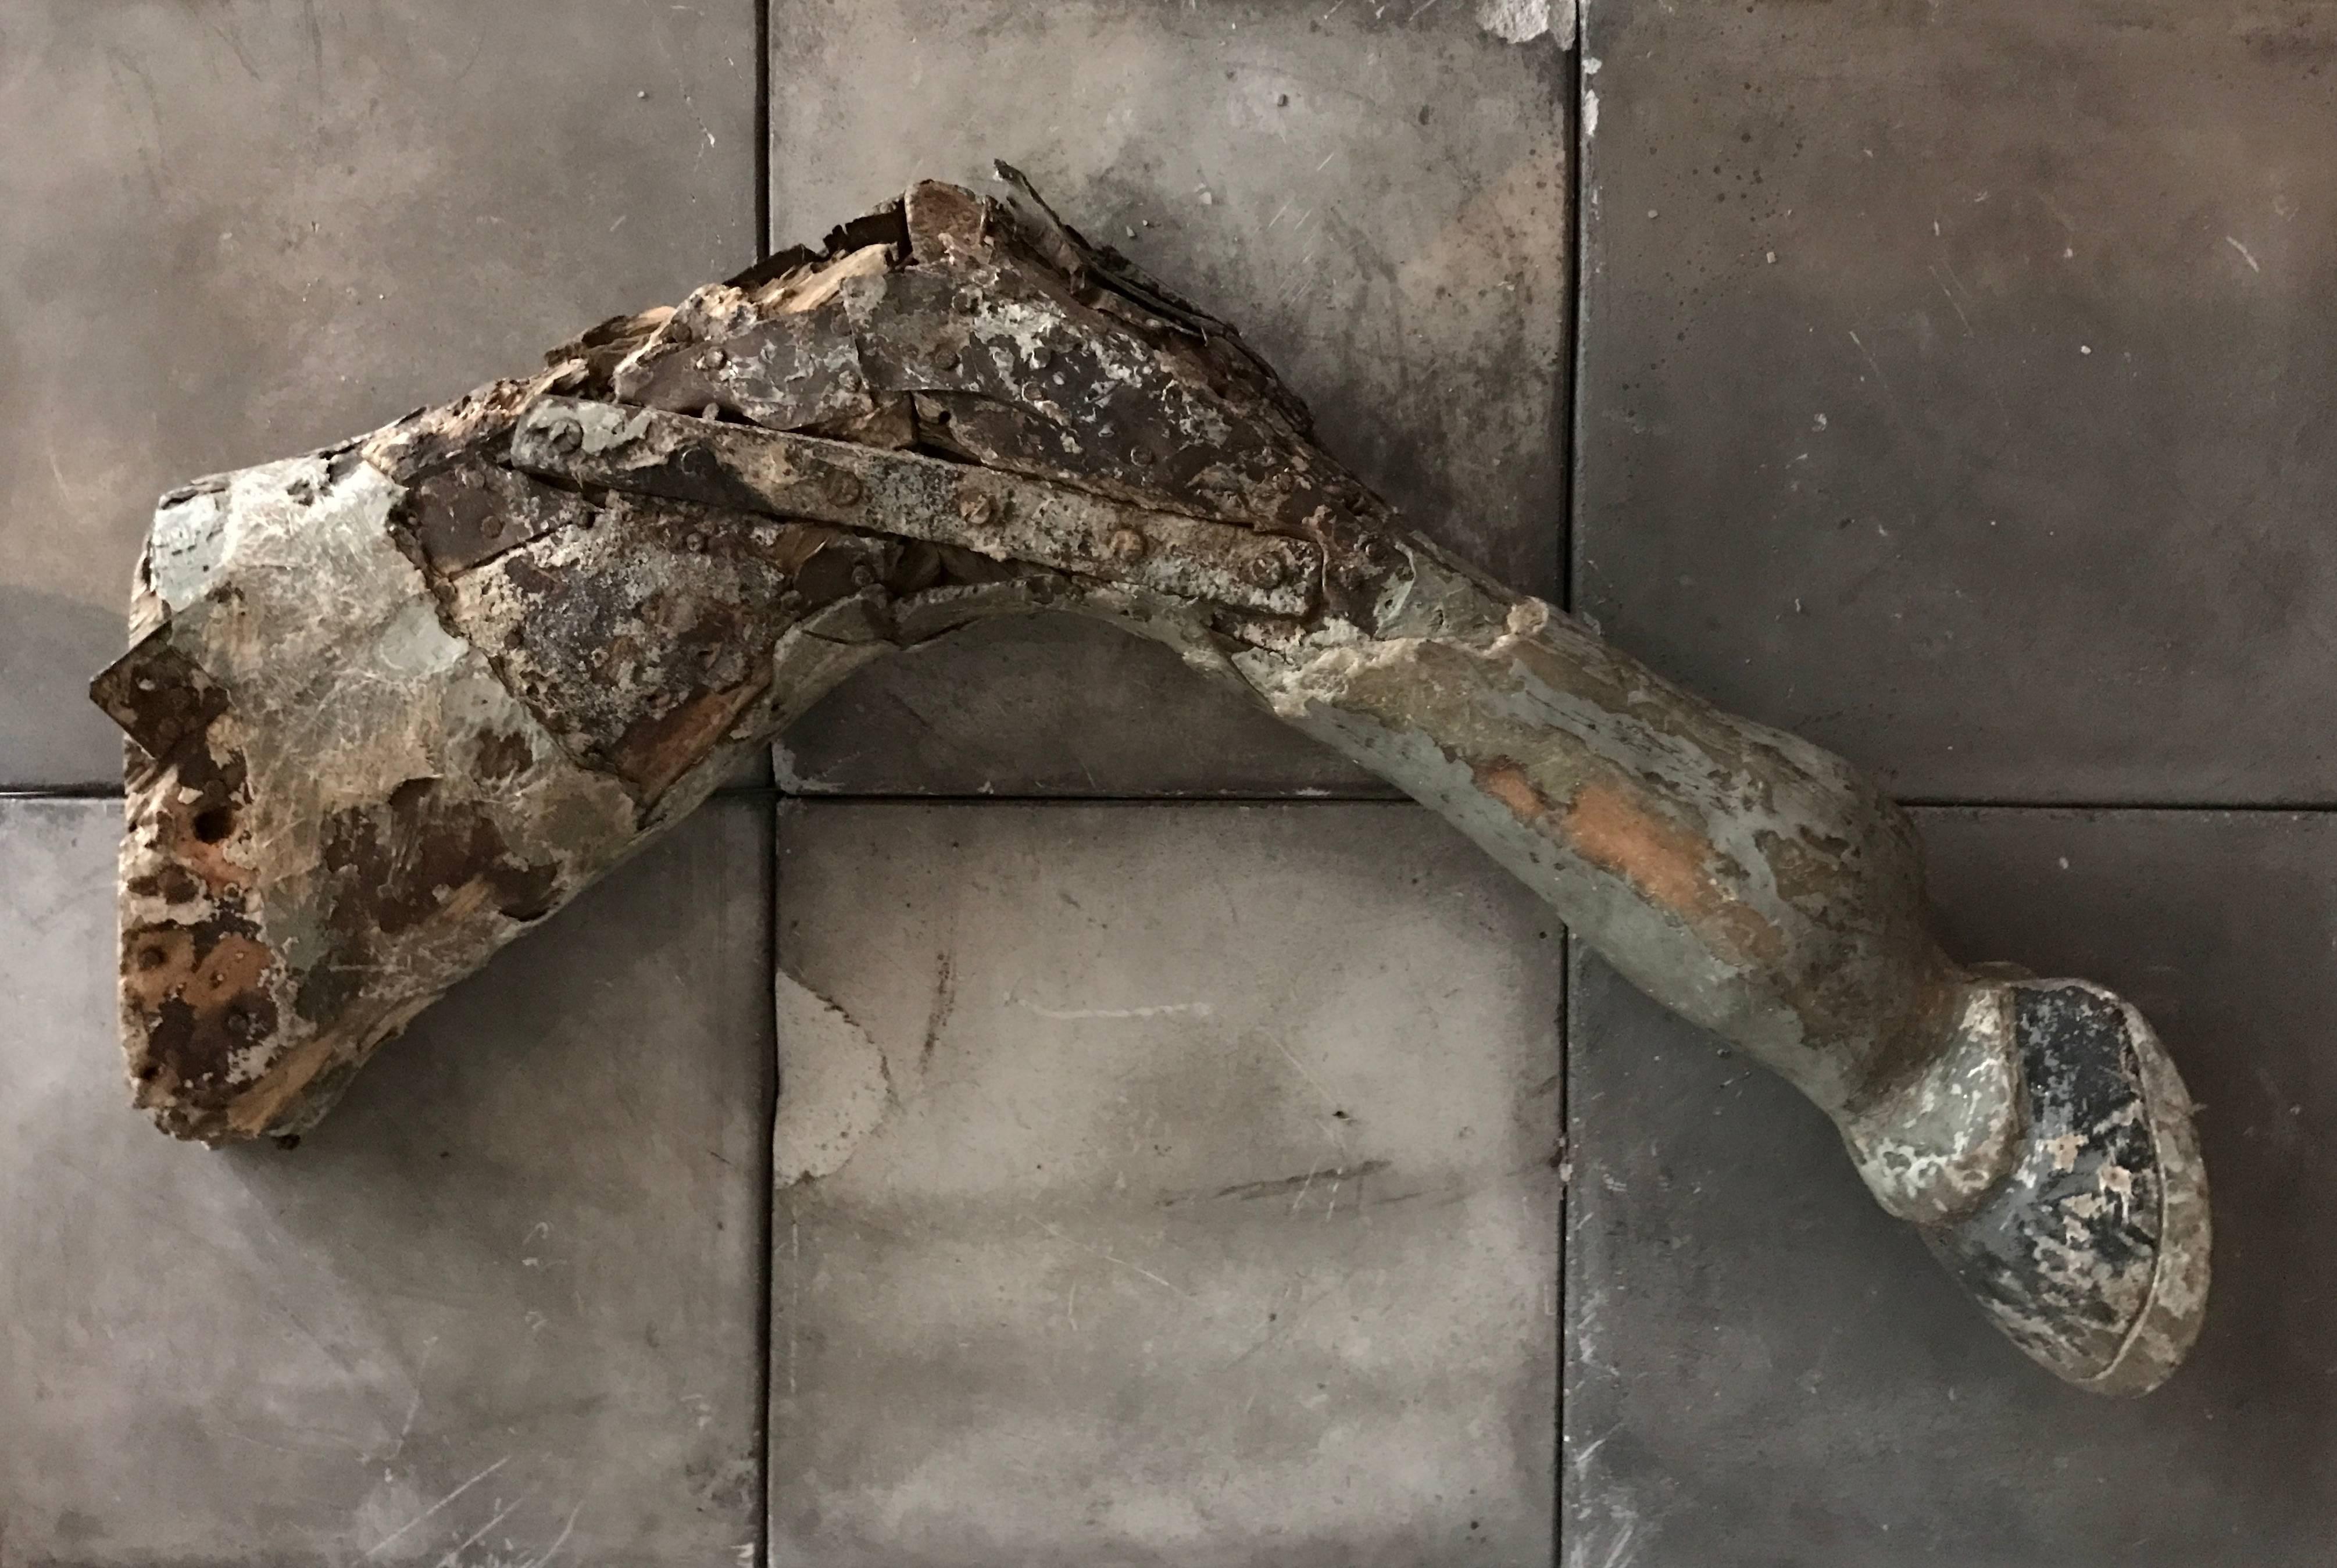 Antique horse leg from the 20th century from an American carousel.
Please note: This item is located in our New York city studio and will be shipped from there.